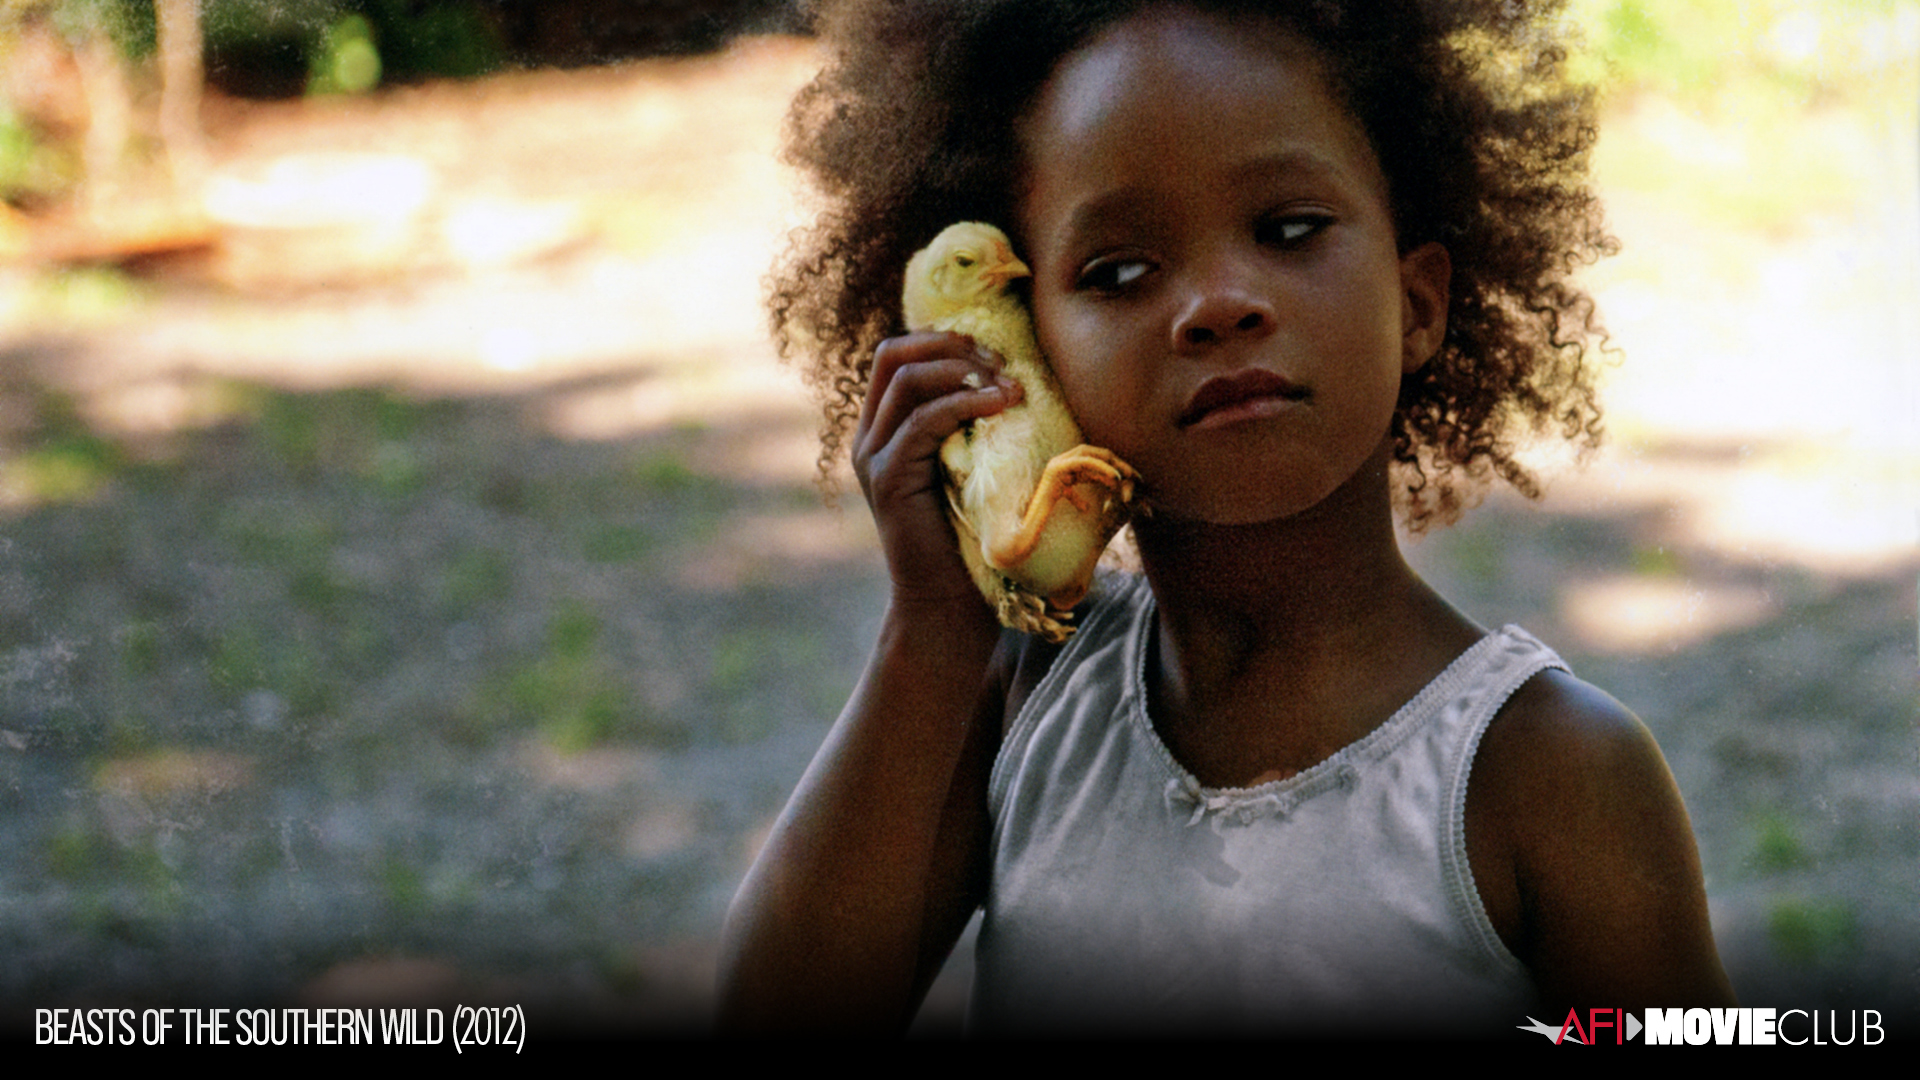 Beasts of the Southern Wild Film Still - Quvenzhané Wallis